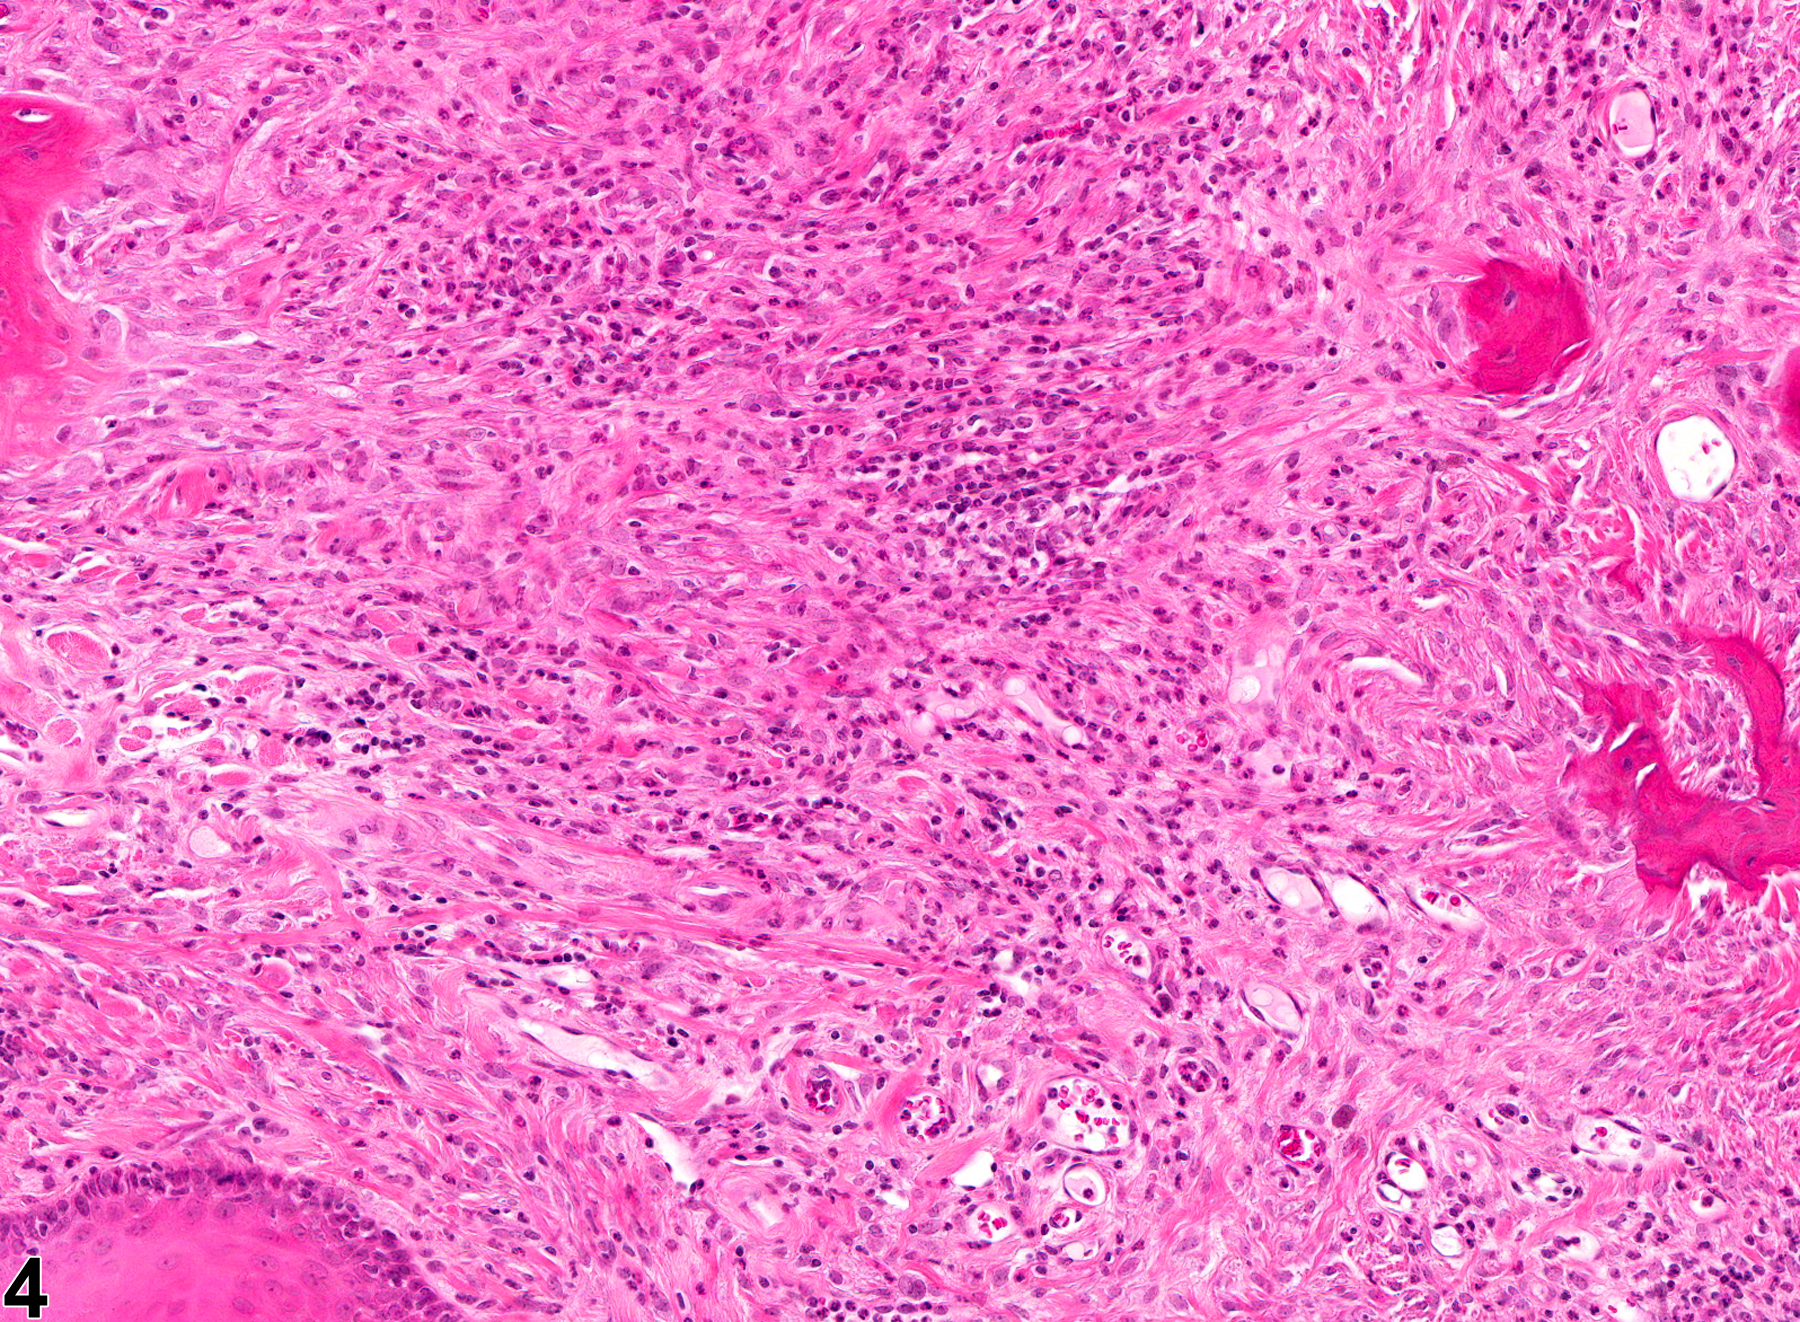 Image of fibrosis in the tooth from a female B6C3F1 mouse in a chronic study